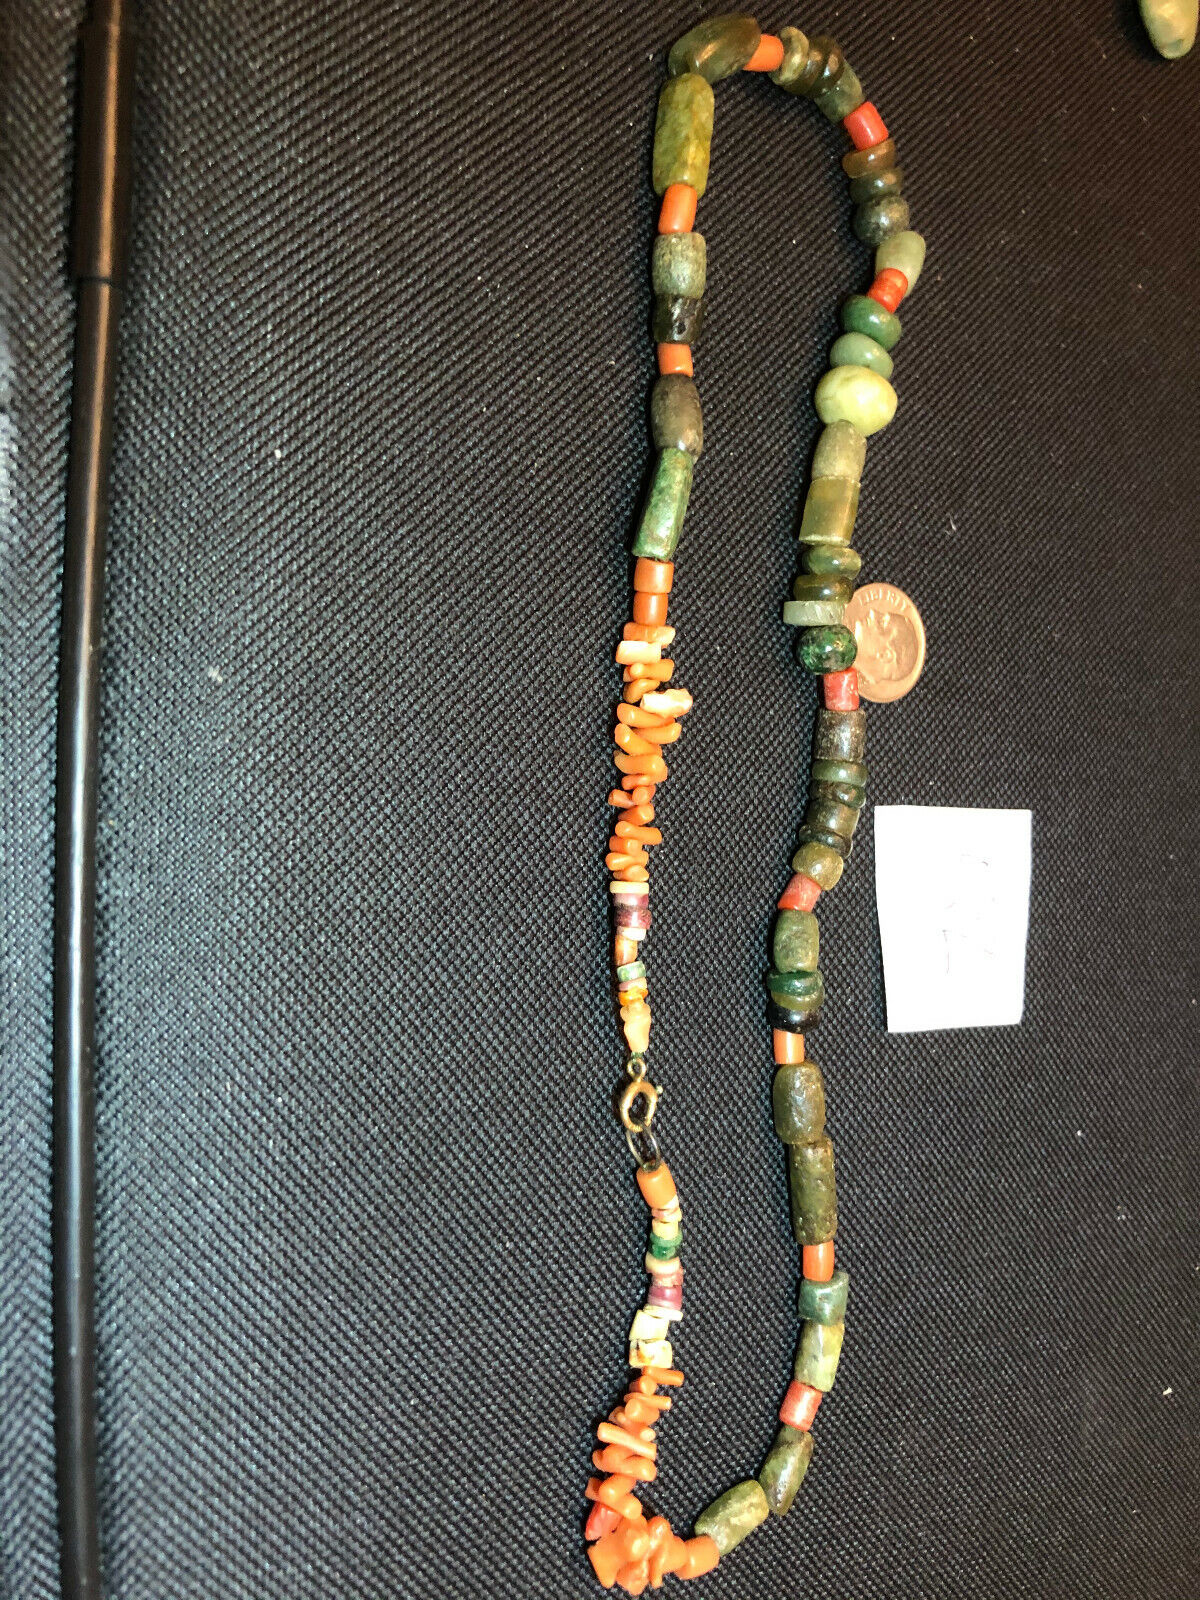 Pre Columbian Mayan AUTHENTIC JADE BEADS (38) Pieces + (35) Red Agate beads Без бренда - фотография #6